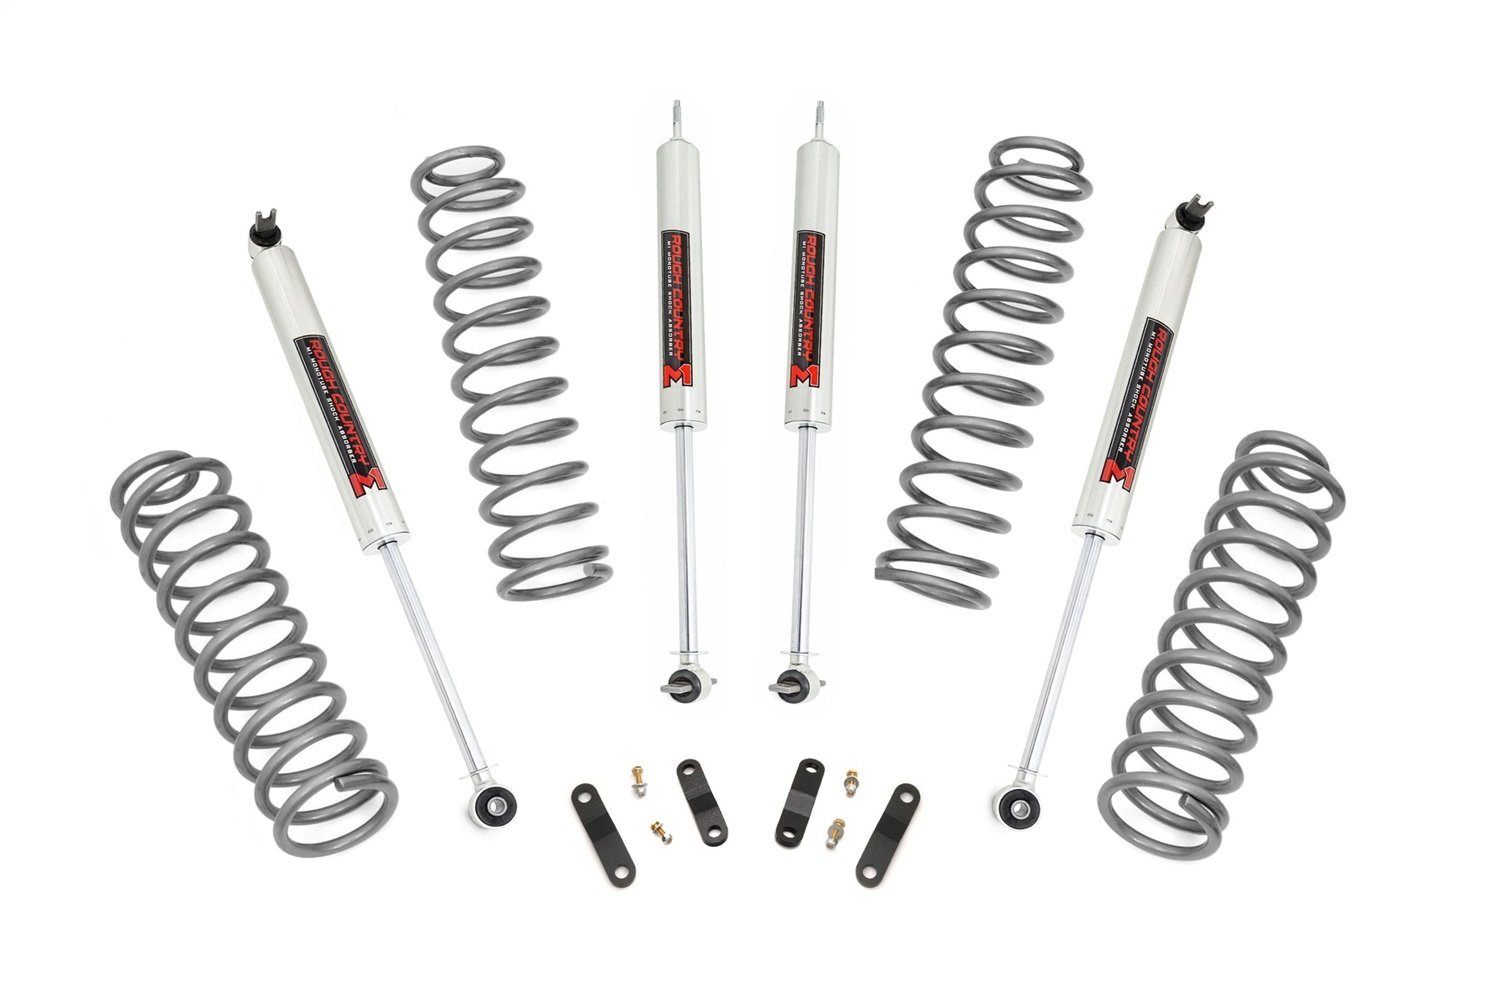 67840 Front and Rear Suspension Lift Kit, Lift Amount: 2.5 in. Front/2.5 in. Rear